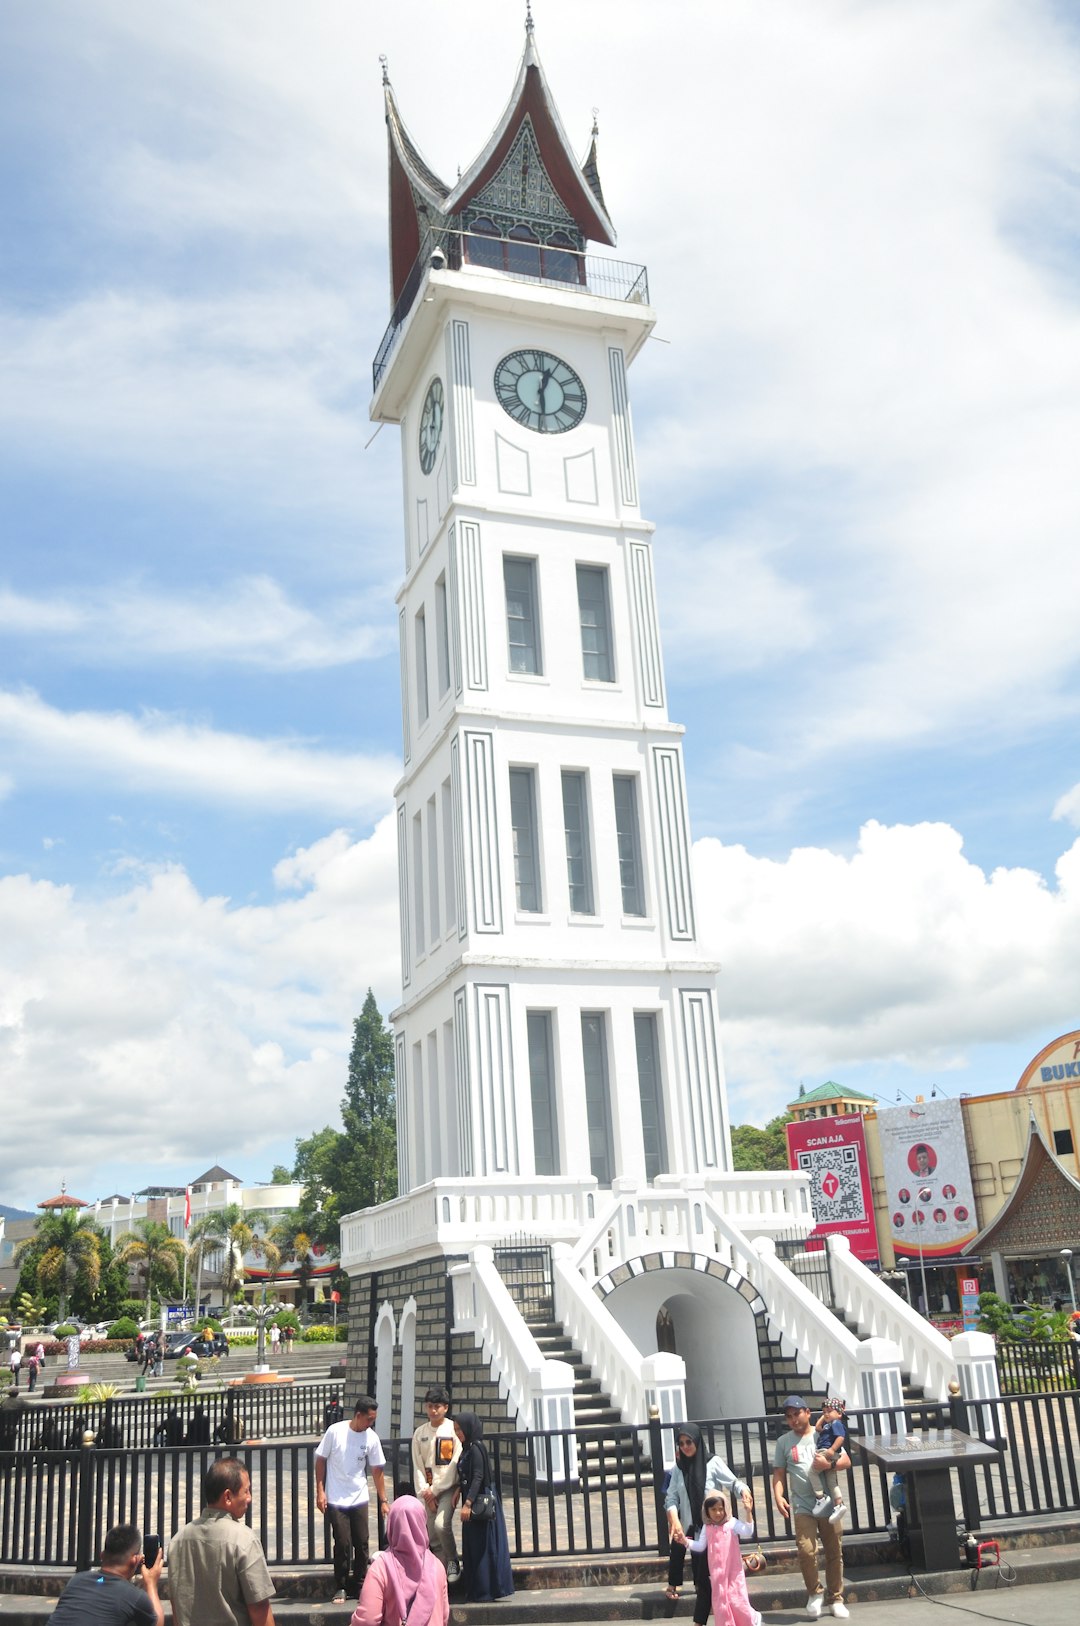 Travel Tips and Stories of Jam Gadang in Indonesia